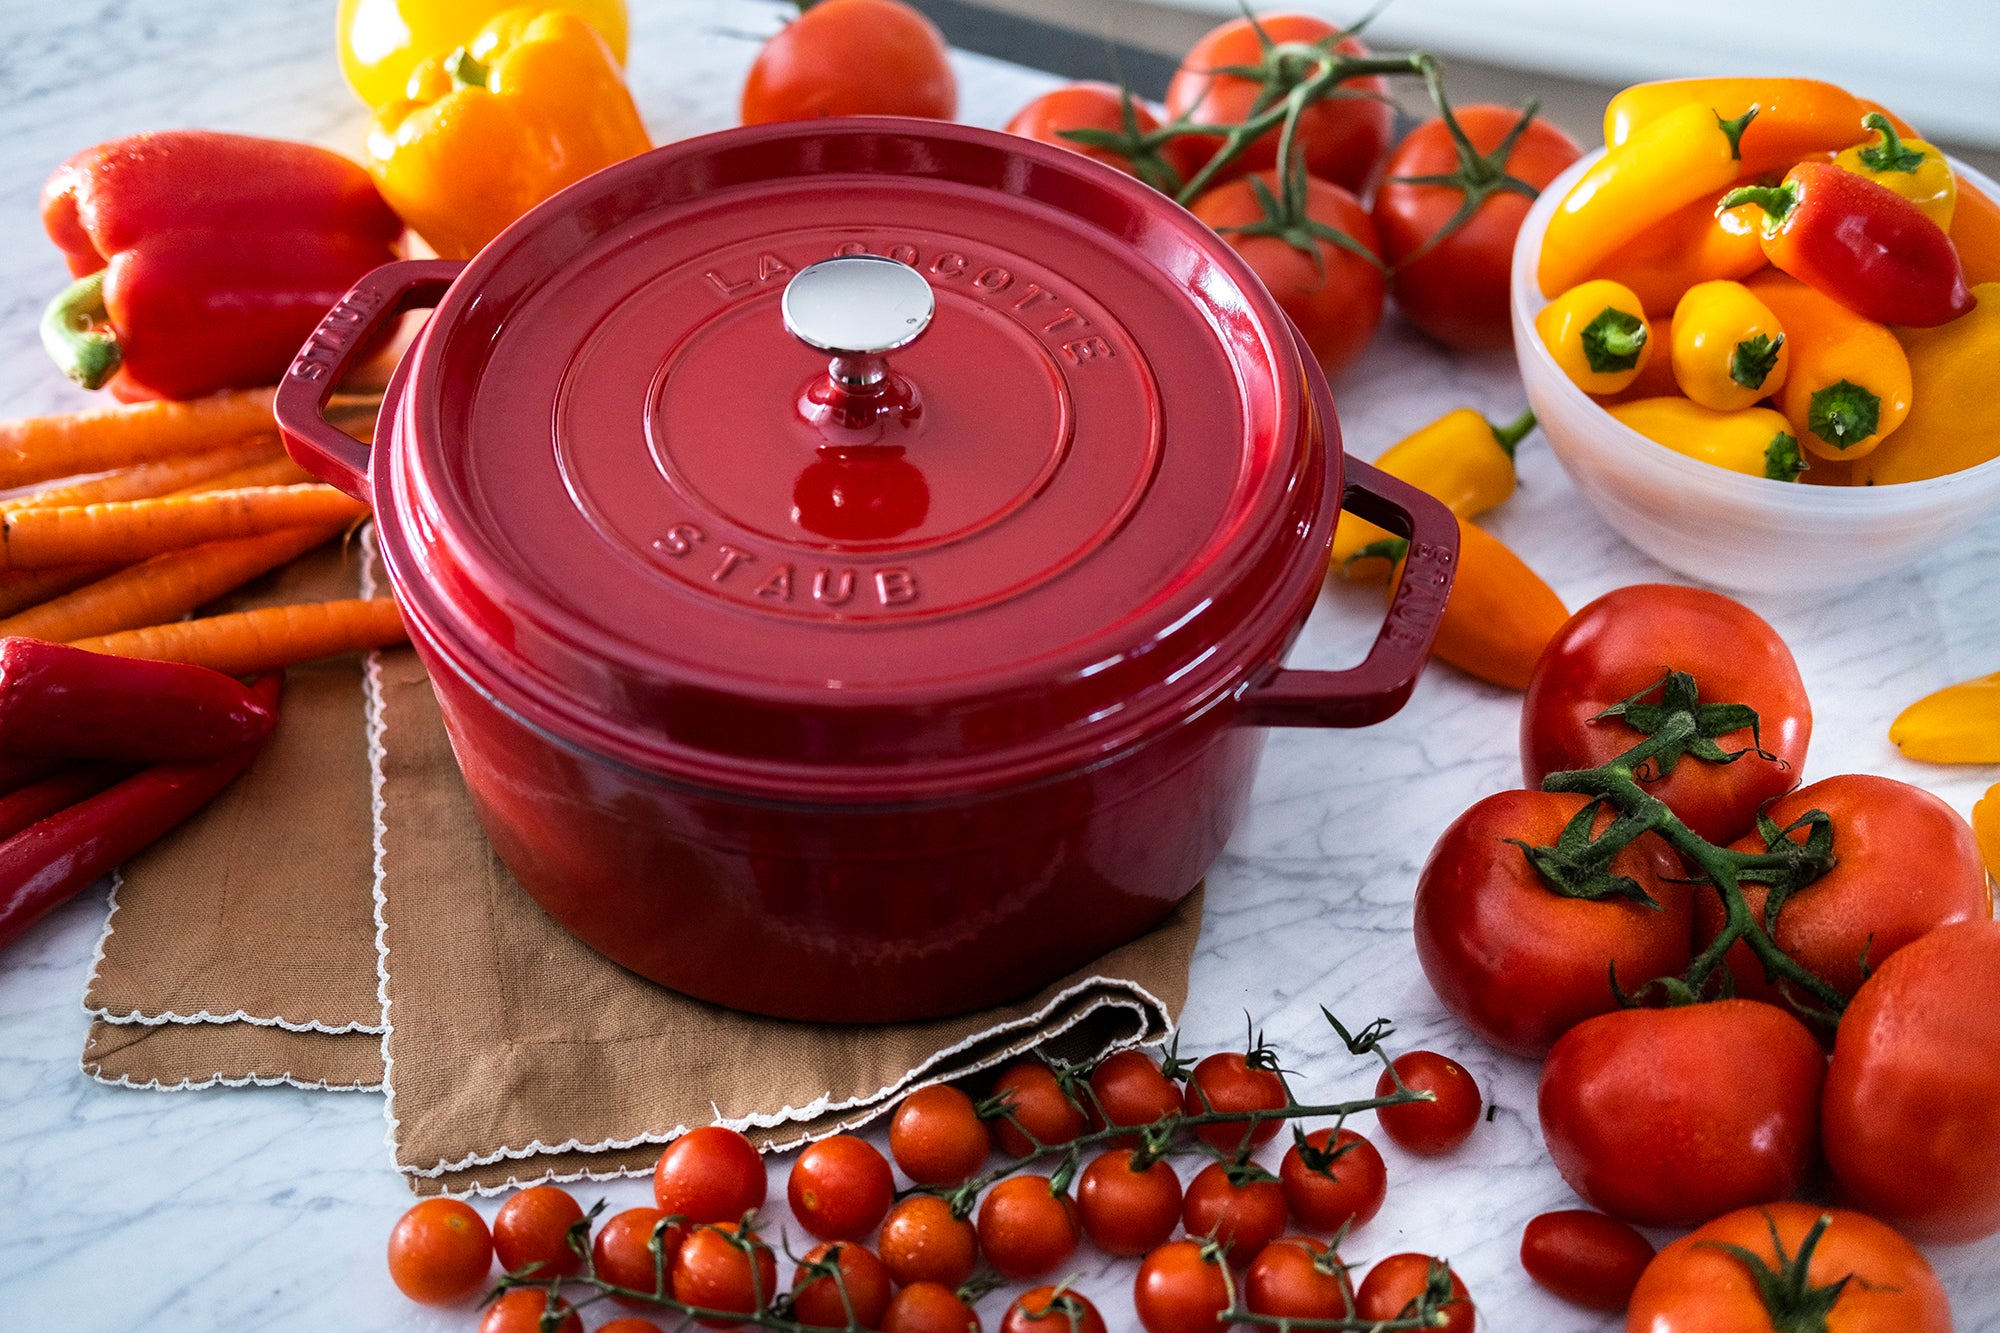 New Staub Cast Iron 4-qt Round Cocotte Dutch Oven, Cerise (Red) Made in  France